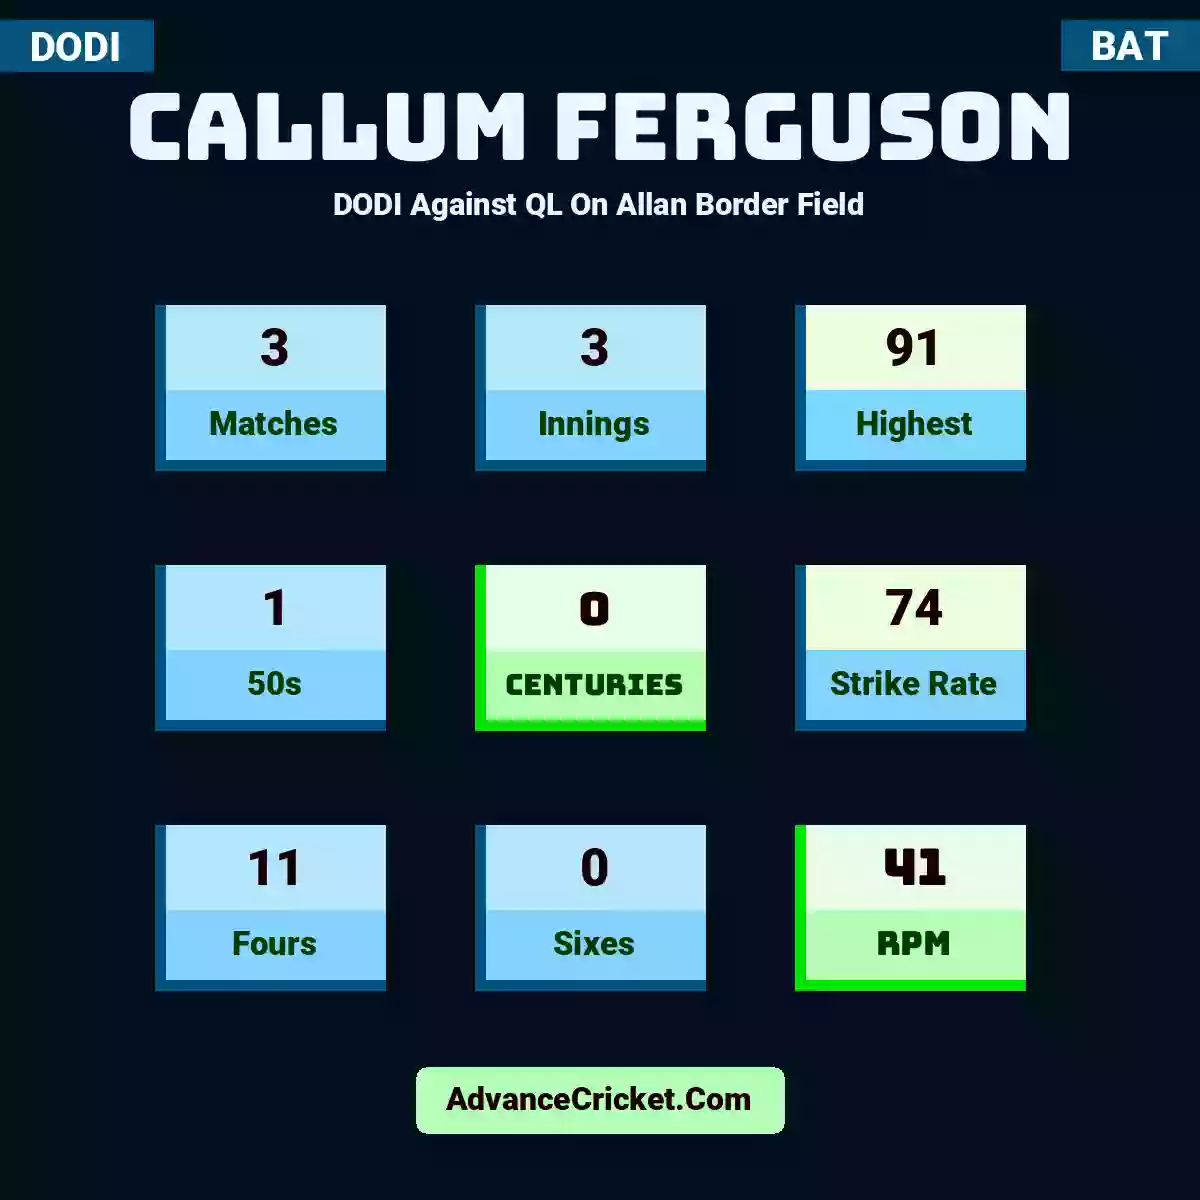 Callum Ferguson DODI  Against QL On Allan Border Field, Callum Ferguson played 3 matches, scored 91 runs as highest, 1 half-centuries, and 0 centuries, with a strike rate of 74. C.Ferguson hit 11 fours and 0 sixes, with an RPM of 41.